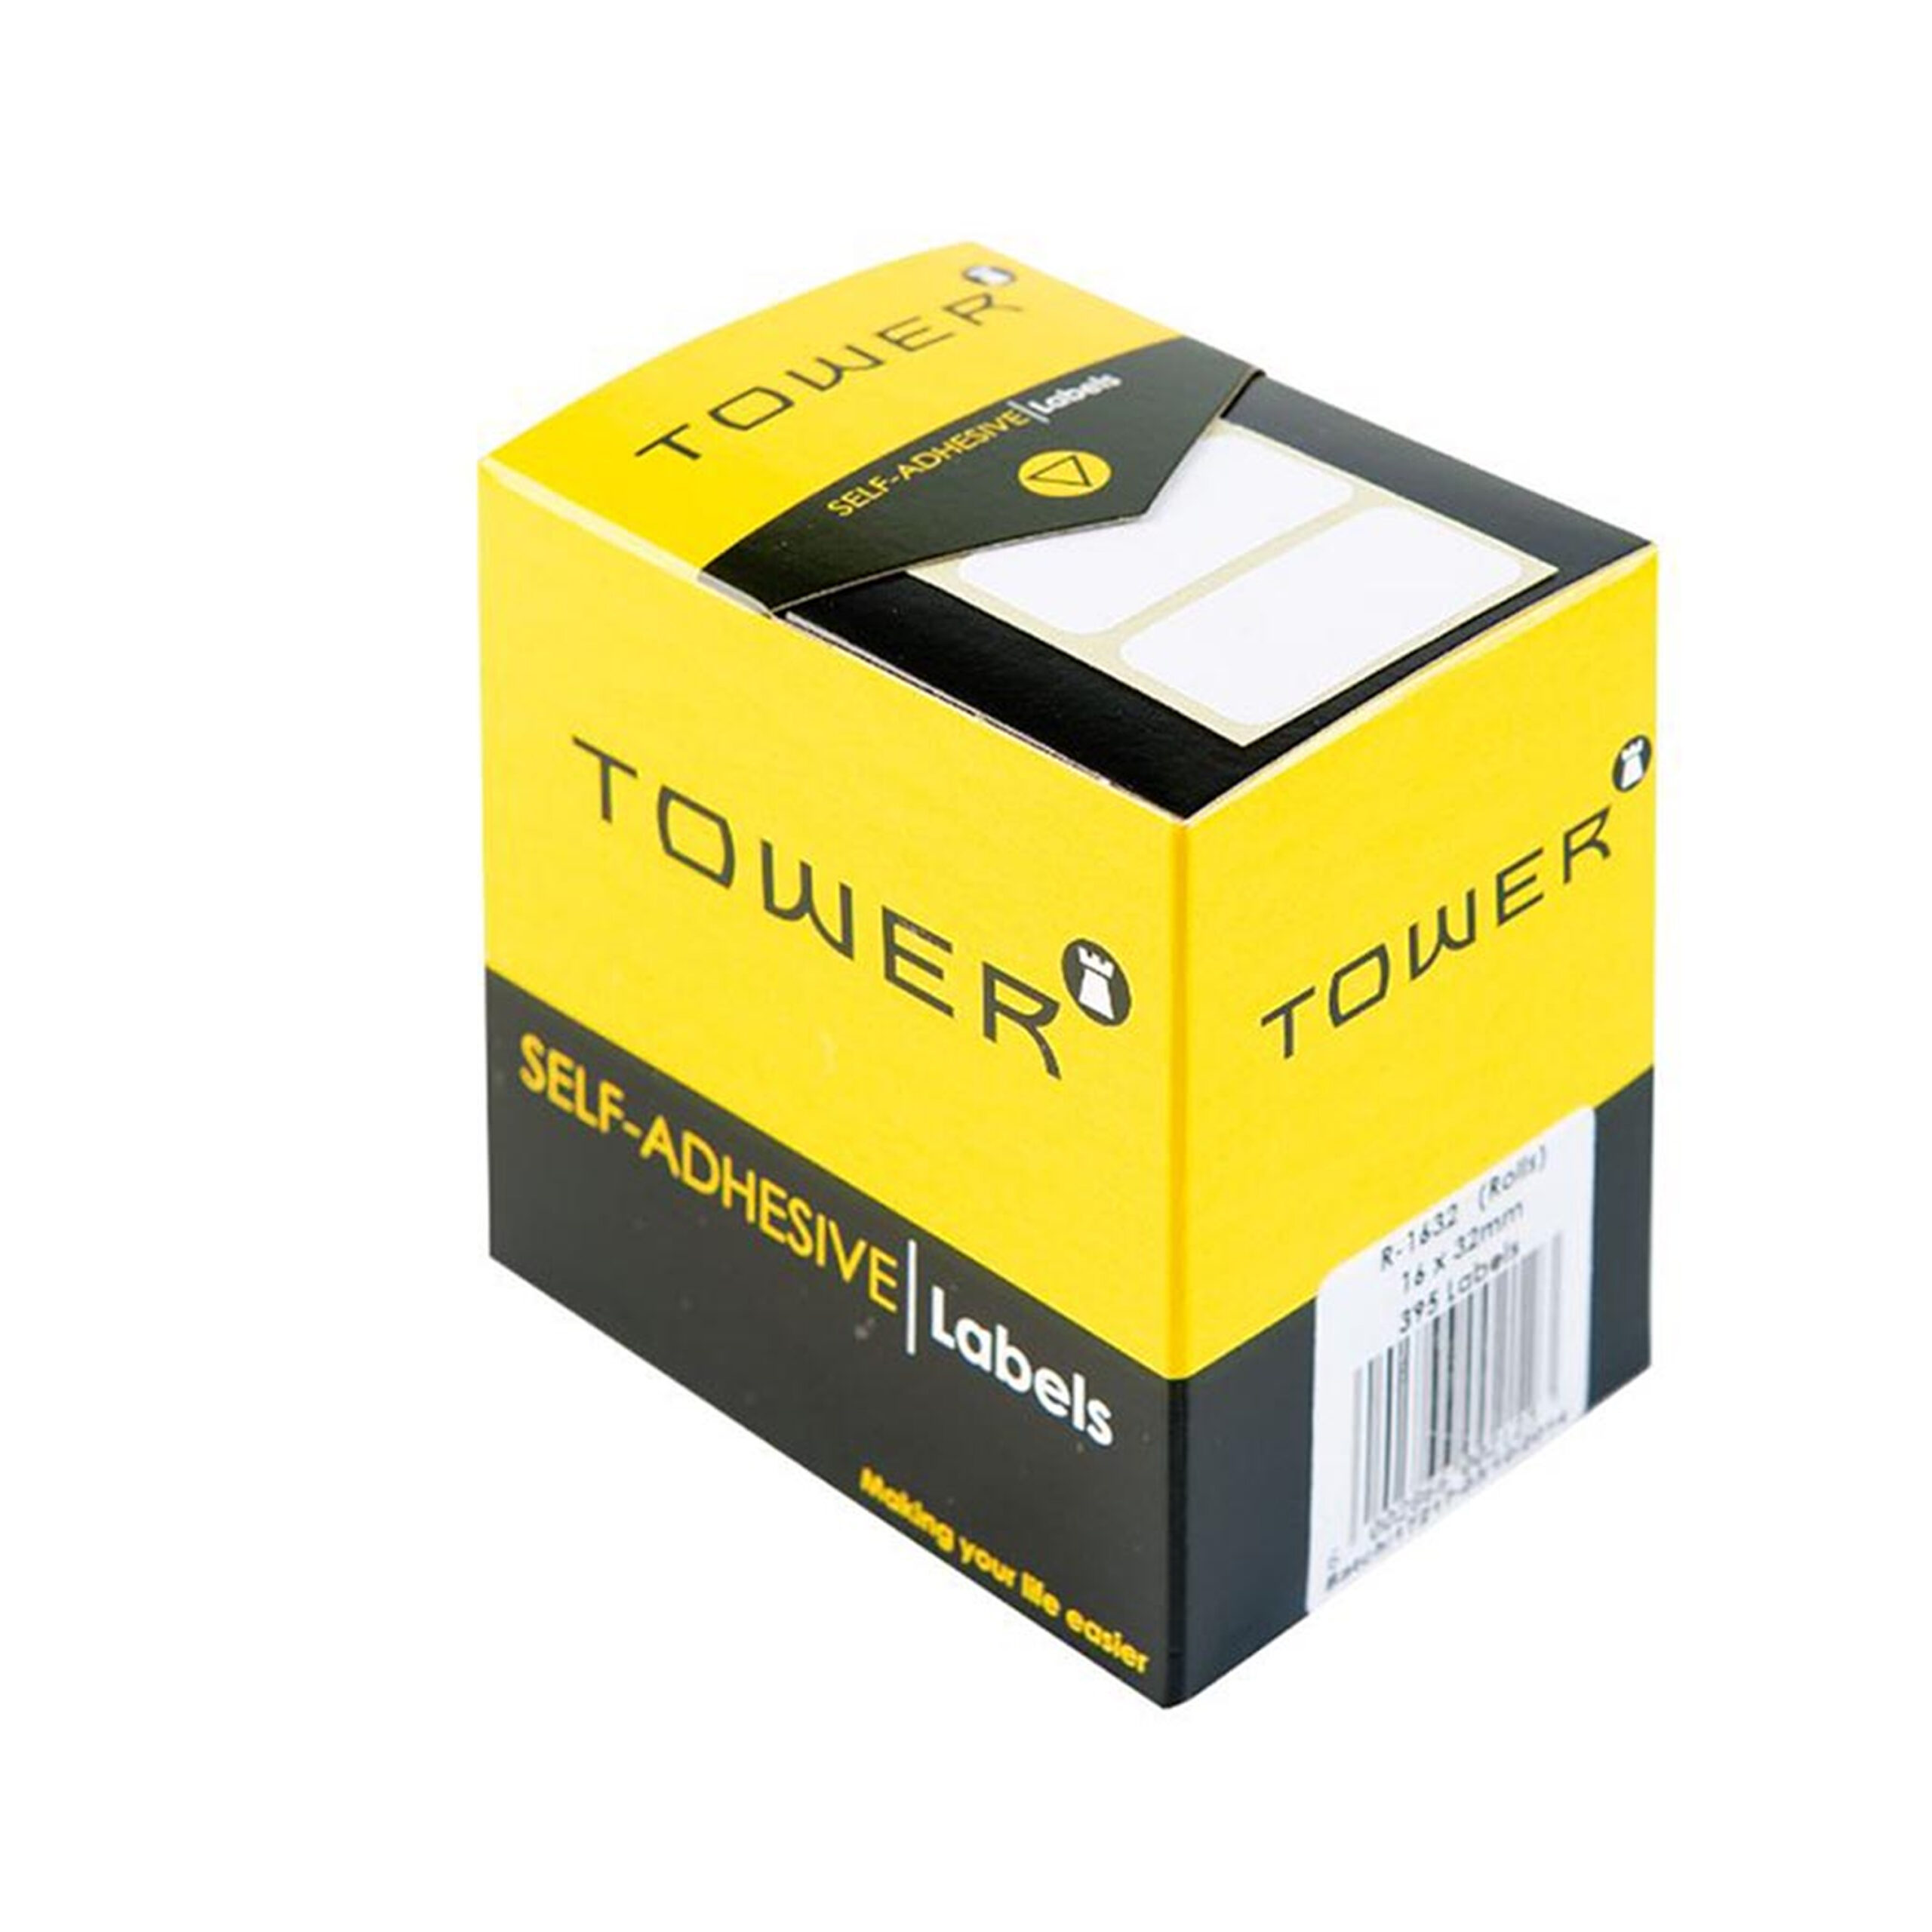 TOWER  SELF
ADHESIVE WHITE
LABELS  16x32mm 
(395 LABELS)